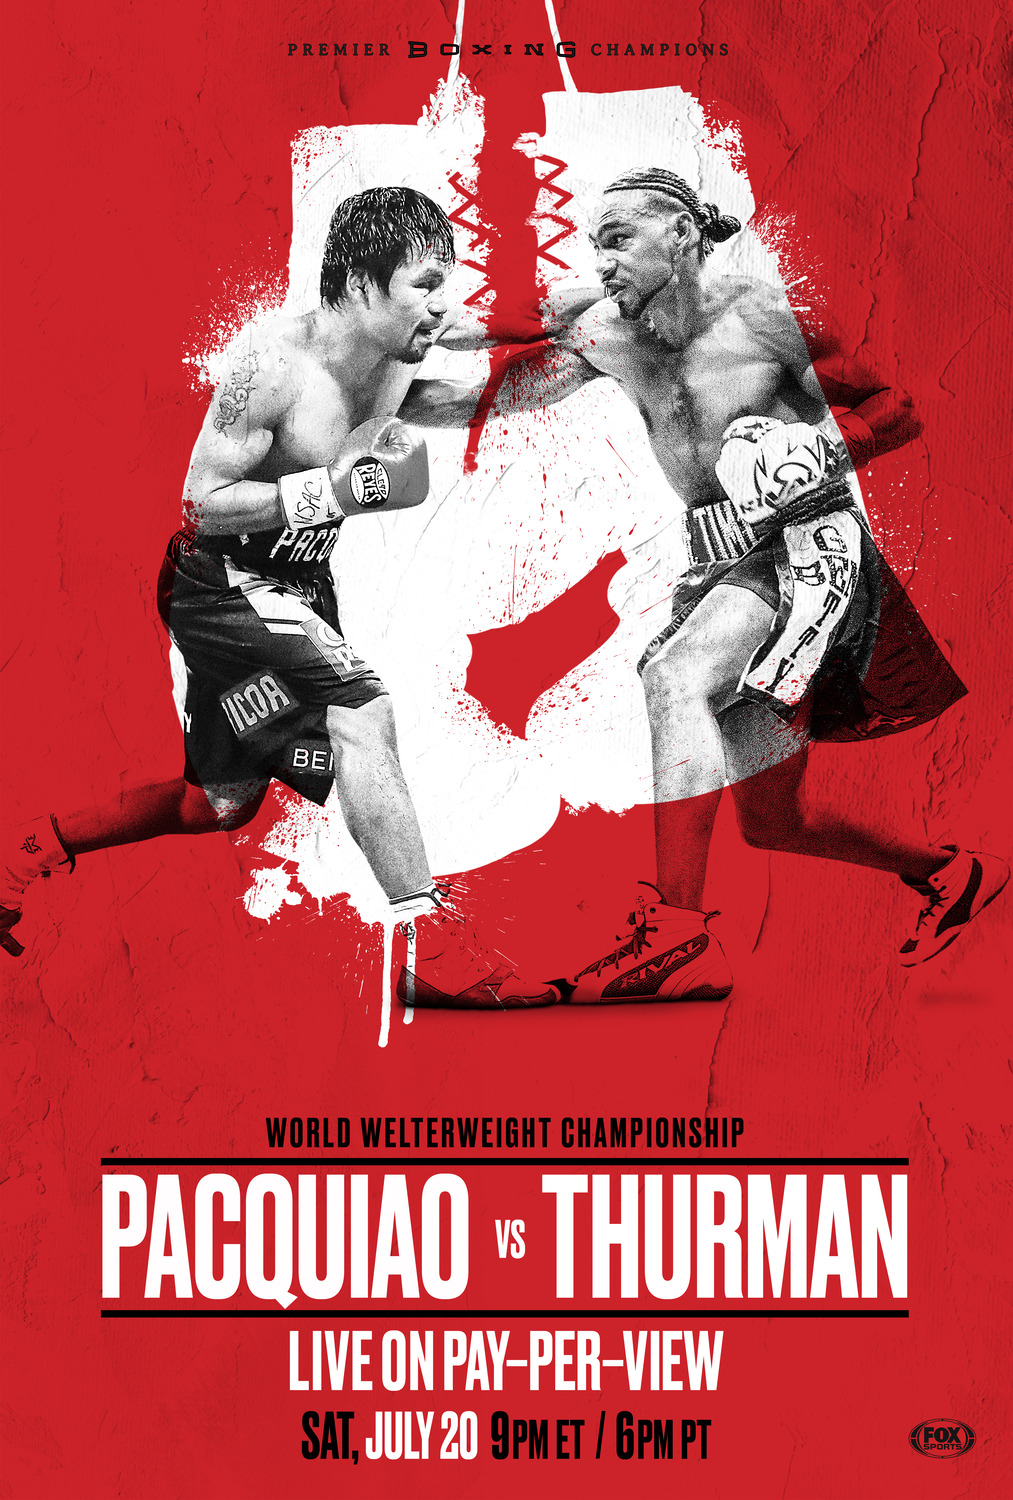 Extra Large TV Poster Image for Pacquiao vs. Thurman 